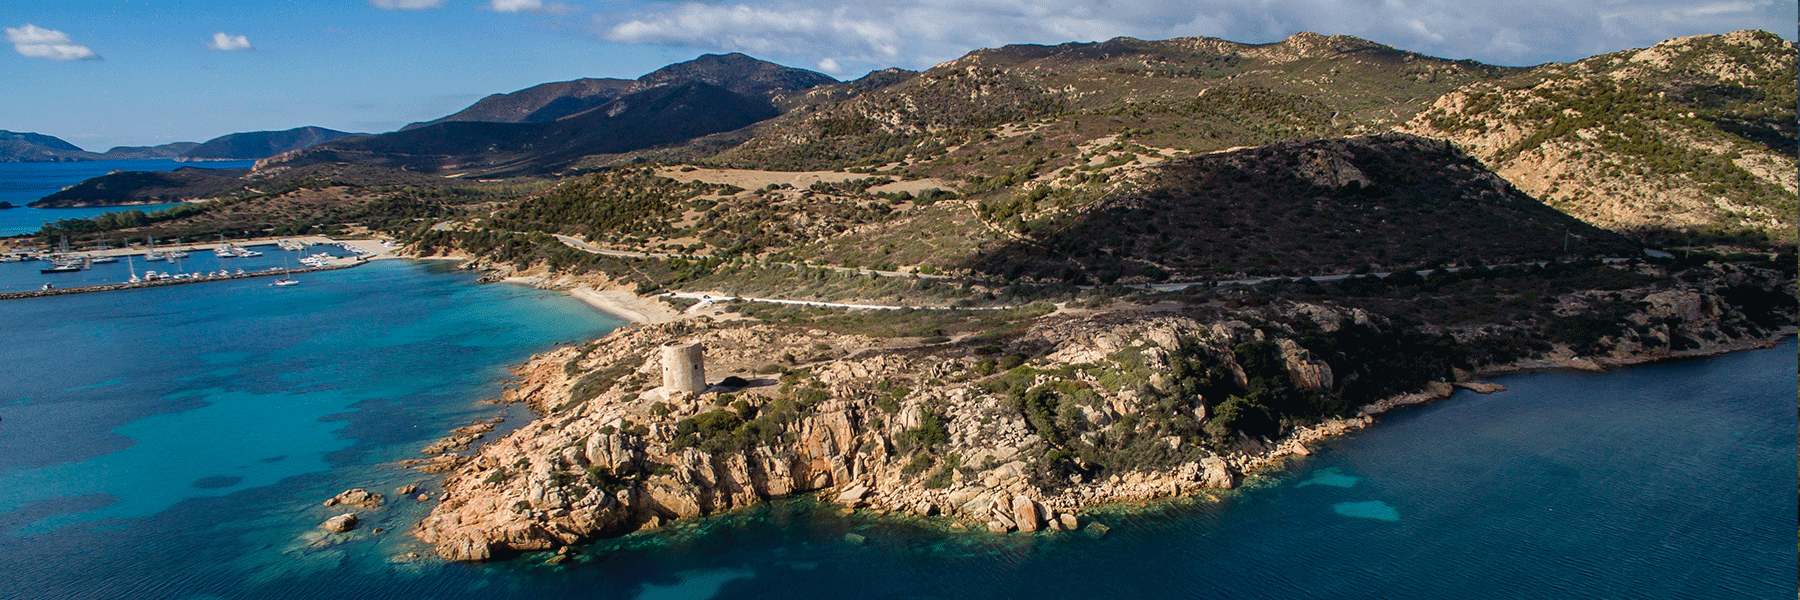 Wide angle image of the Sardinian rugged coast covered with green bushes and trees next to the clear water of the Mediterranean Sea in Santa Margeritha di Pula